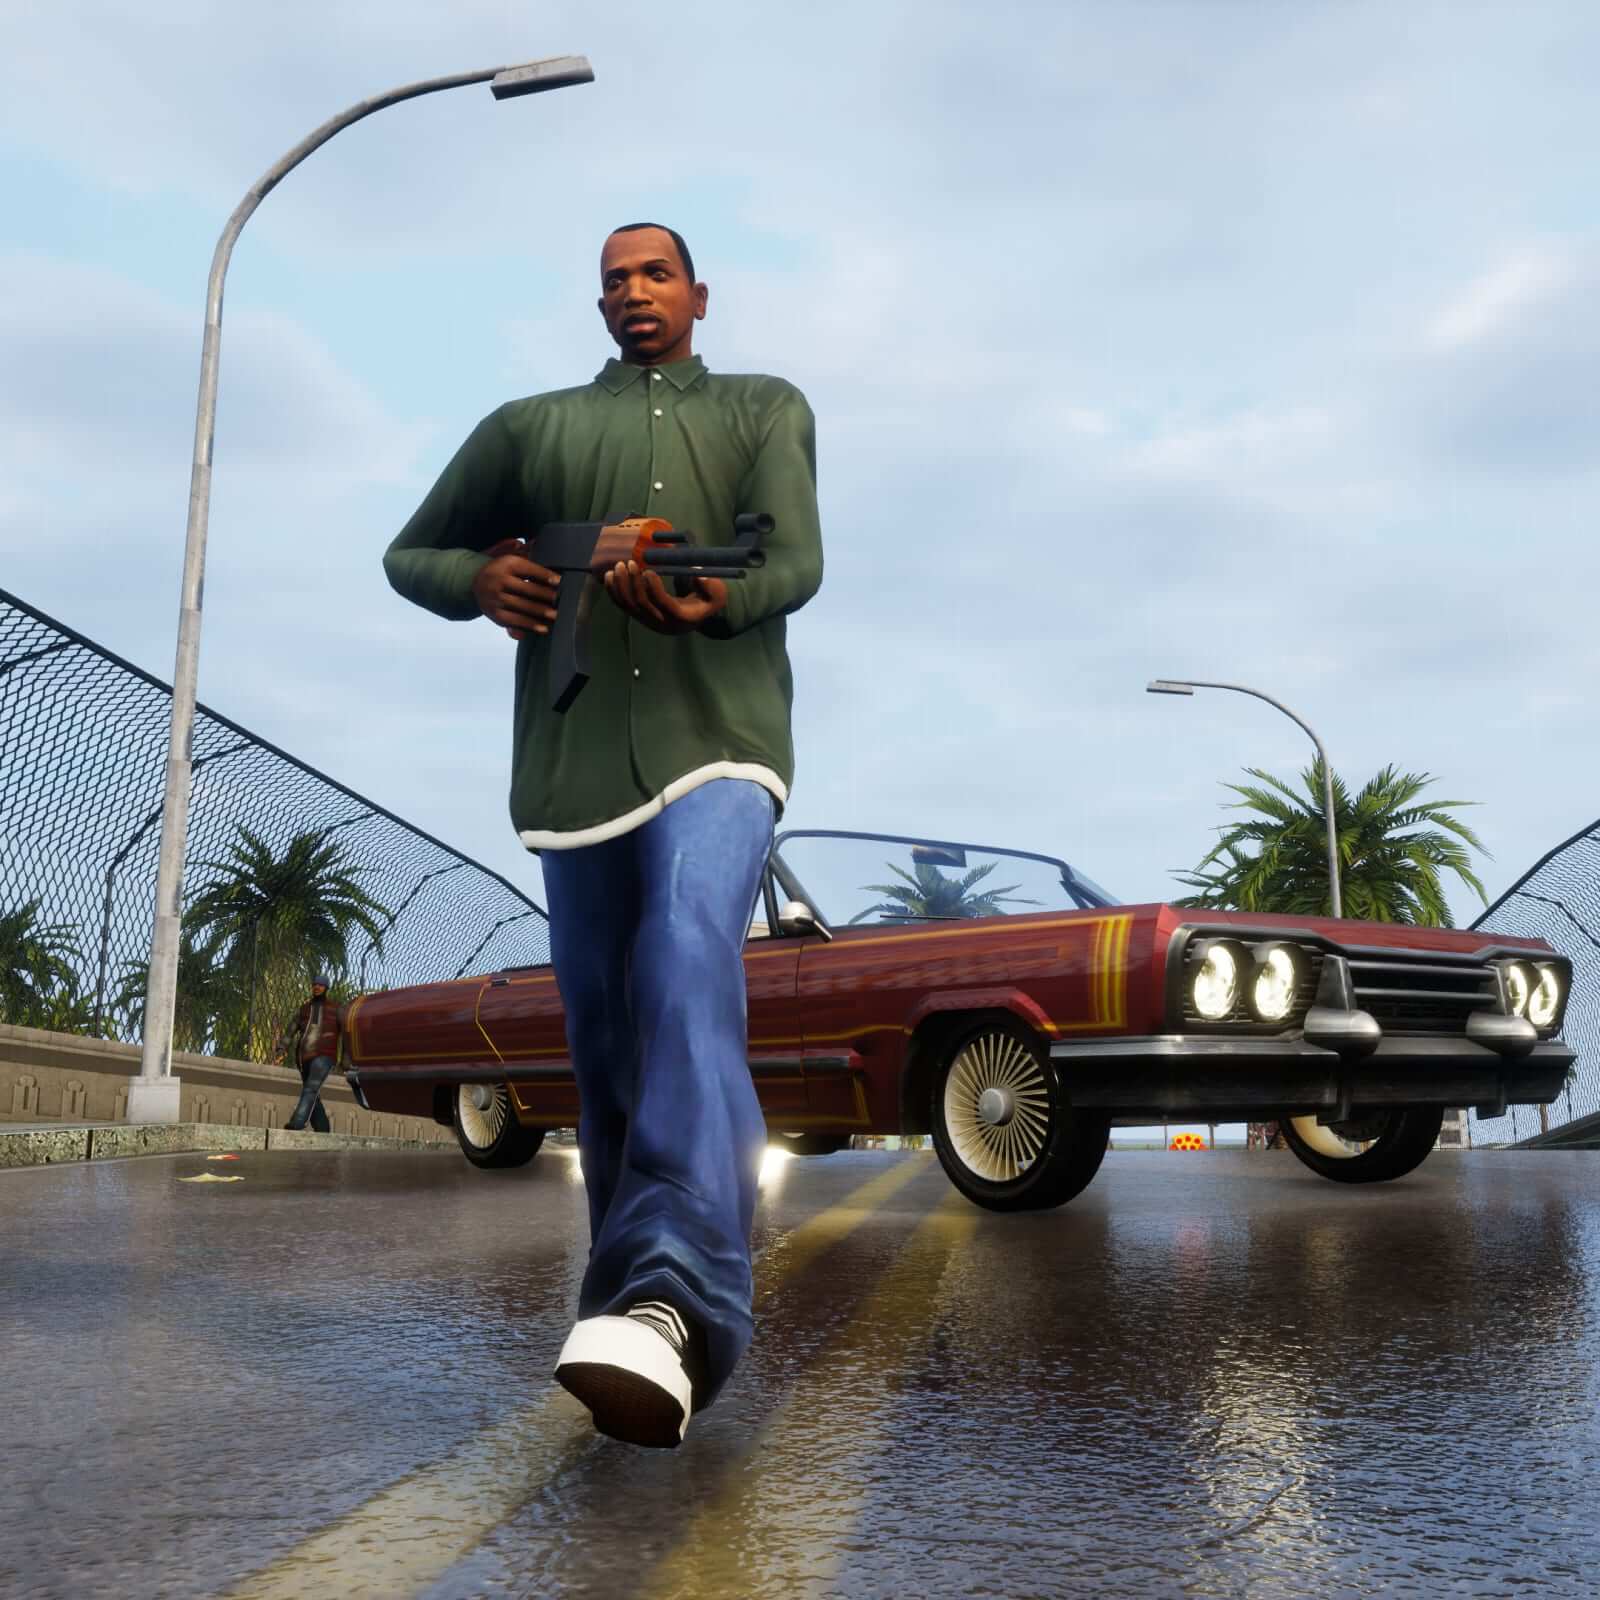 Grand Theft Auto The Trilogy – The Definitive Edition screenshots 10